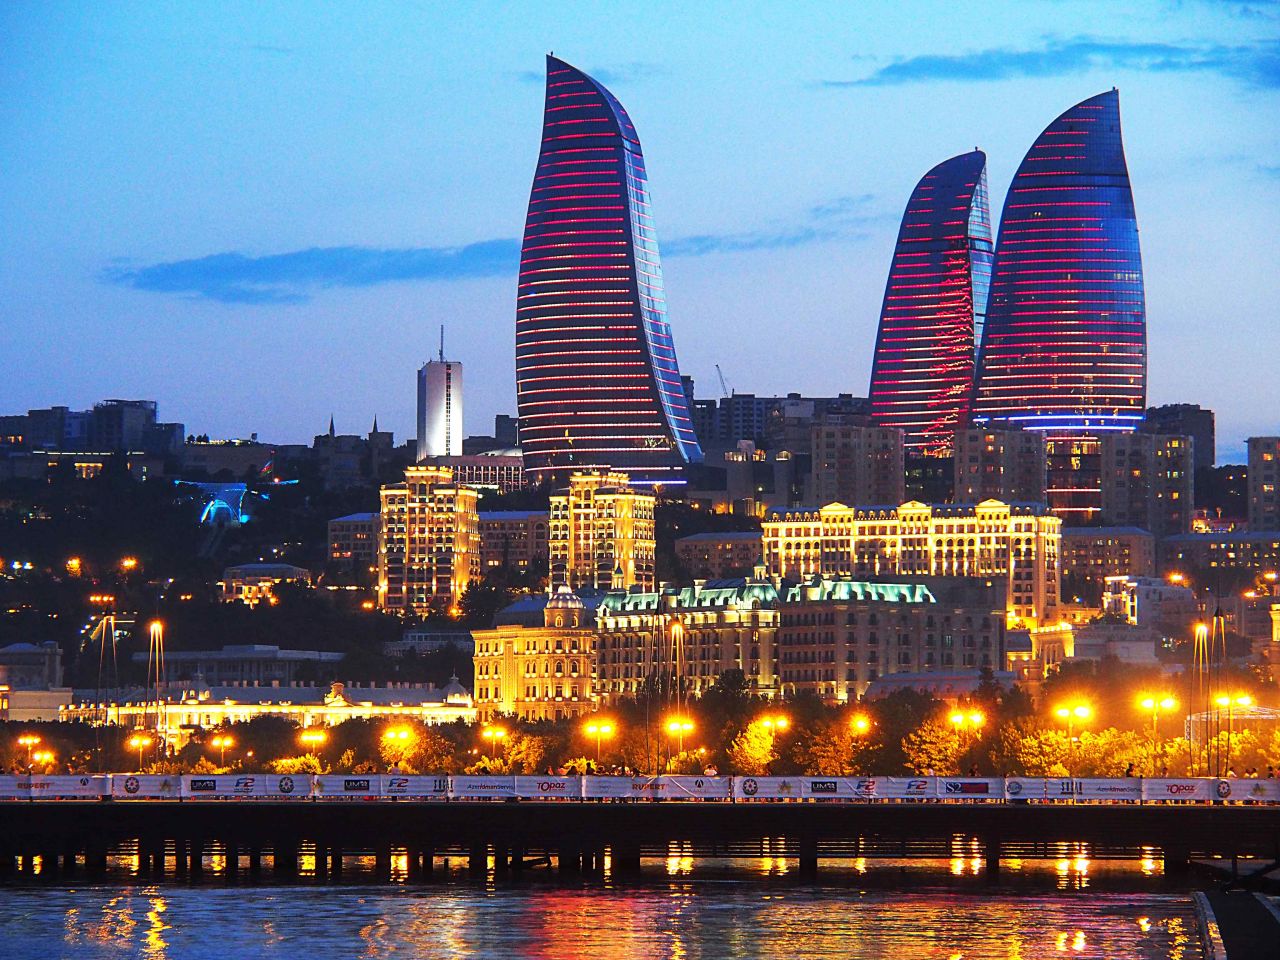 Flame Towers is the tallest skyscraper in Azerbaijan. The towers are completely covered with LED screens displaying the movement of fire and creating the effect of giant torches. The design was inspired by Azerbaijan's history as a land of fire, due to its rich deposits of natural gas.